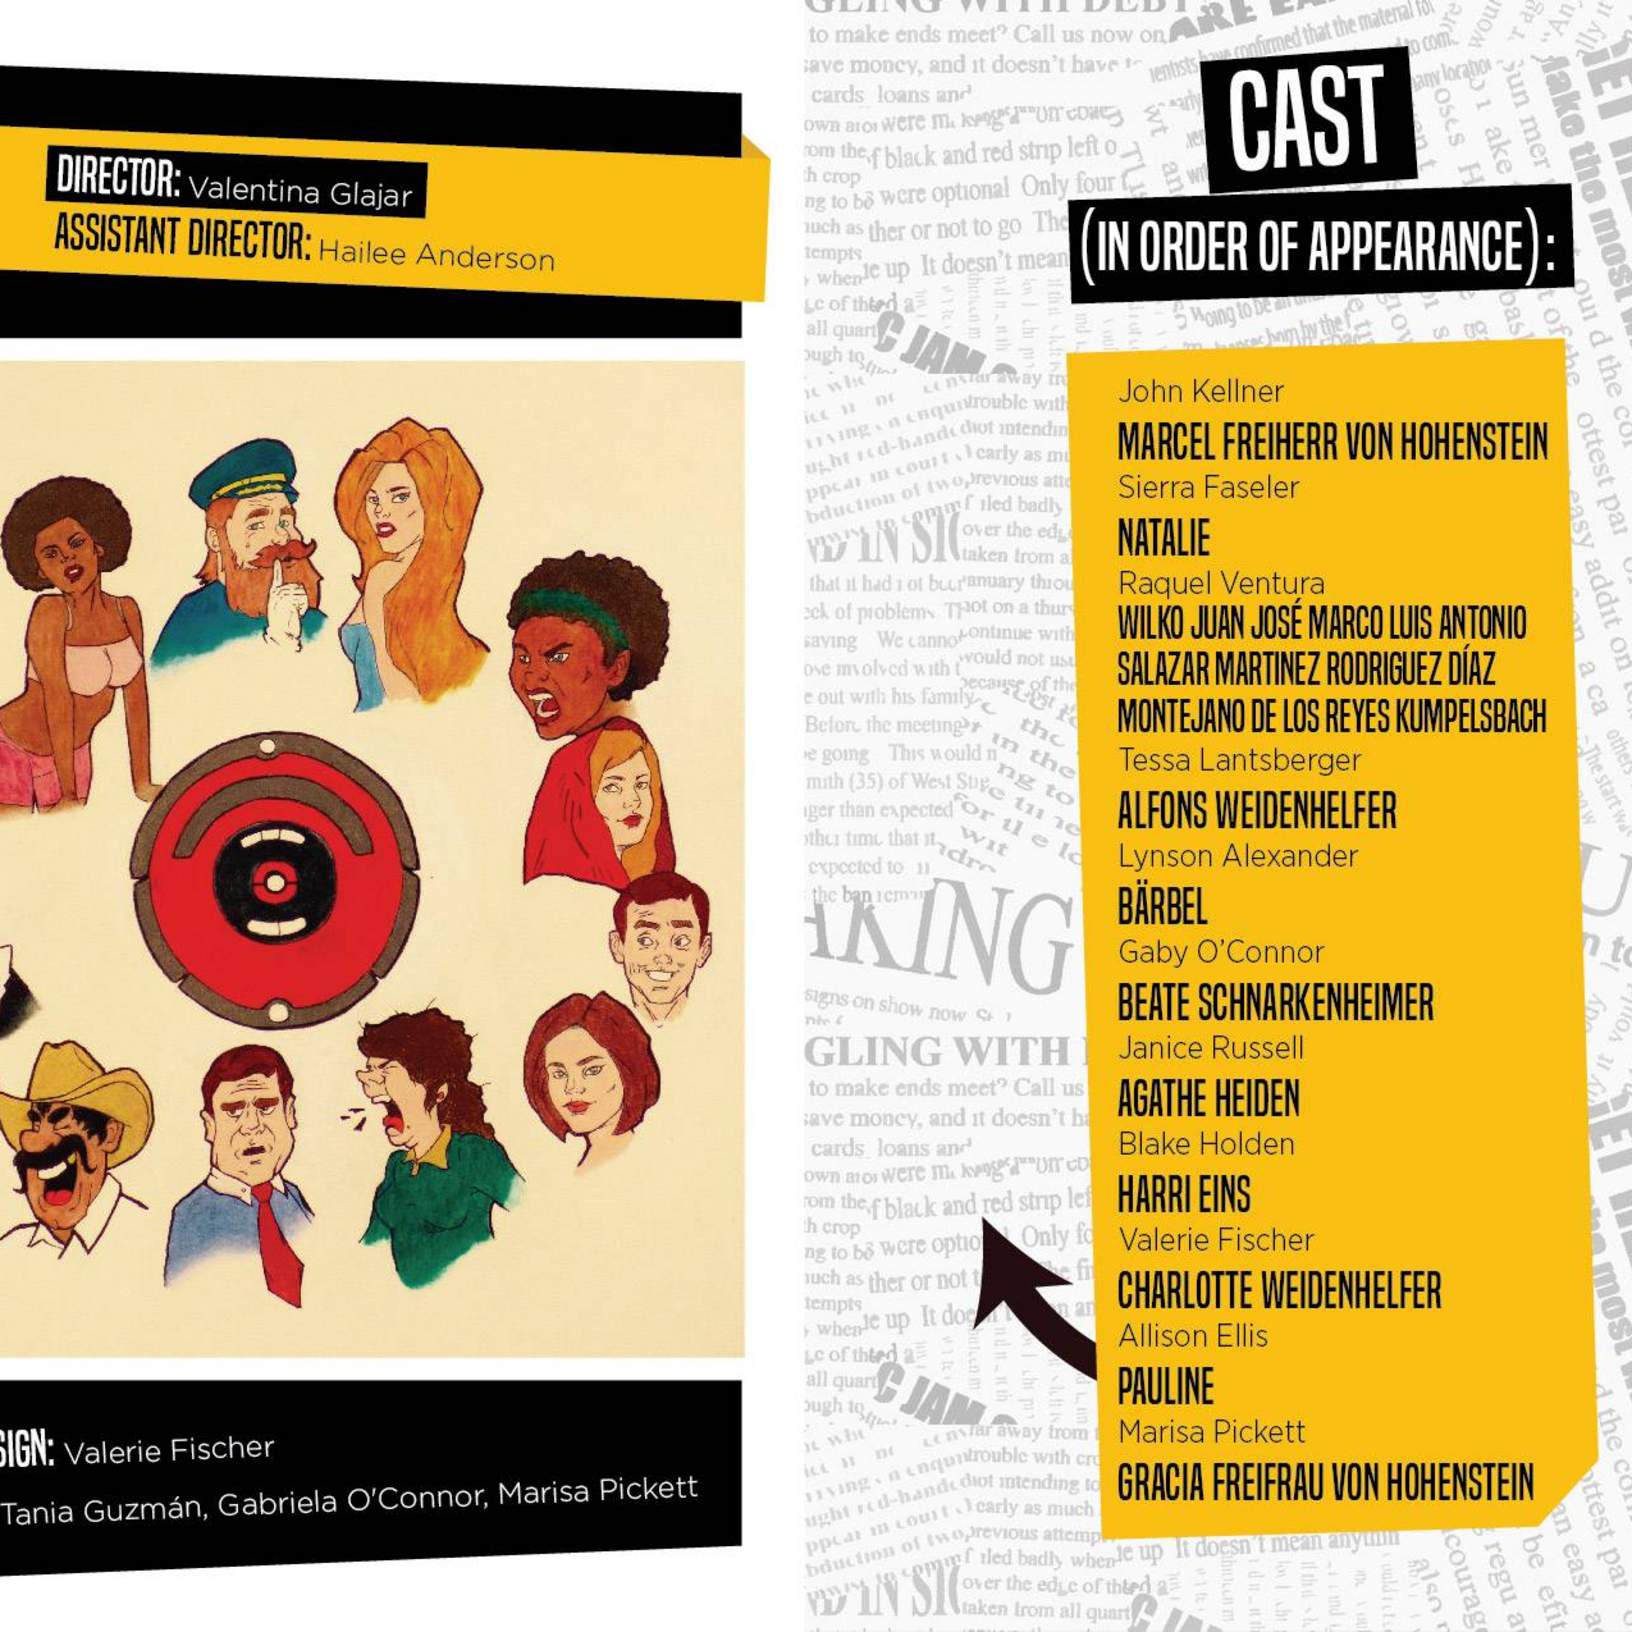 Playbill cover page and cast list